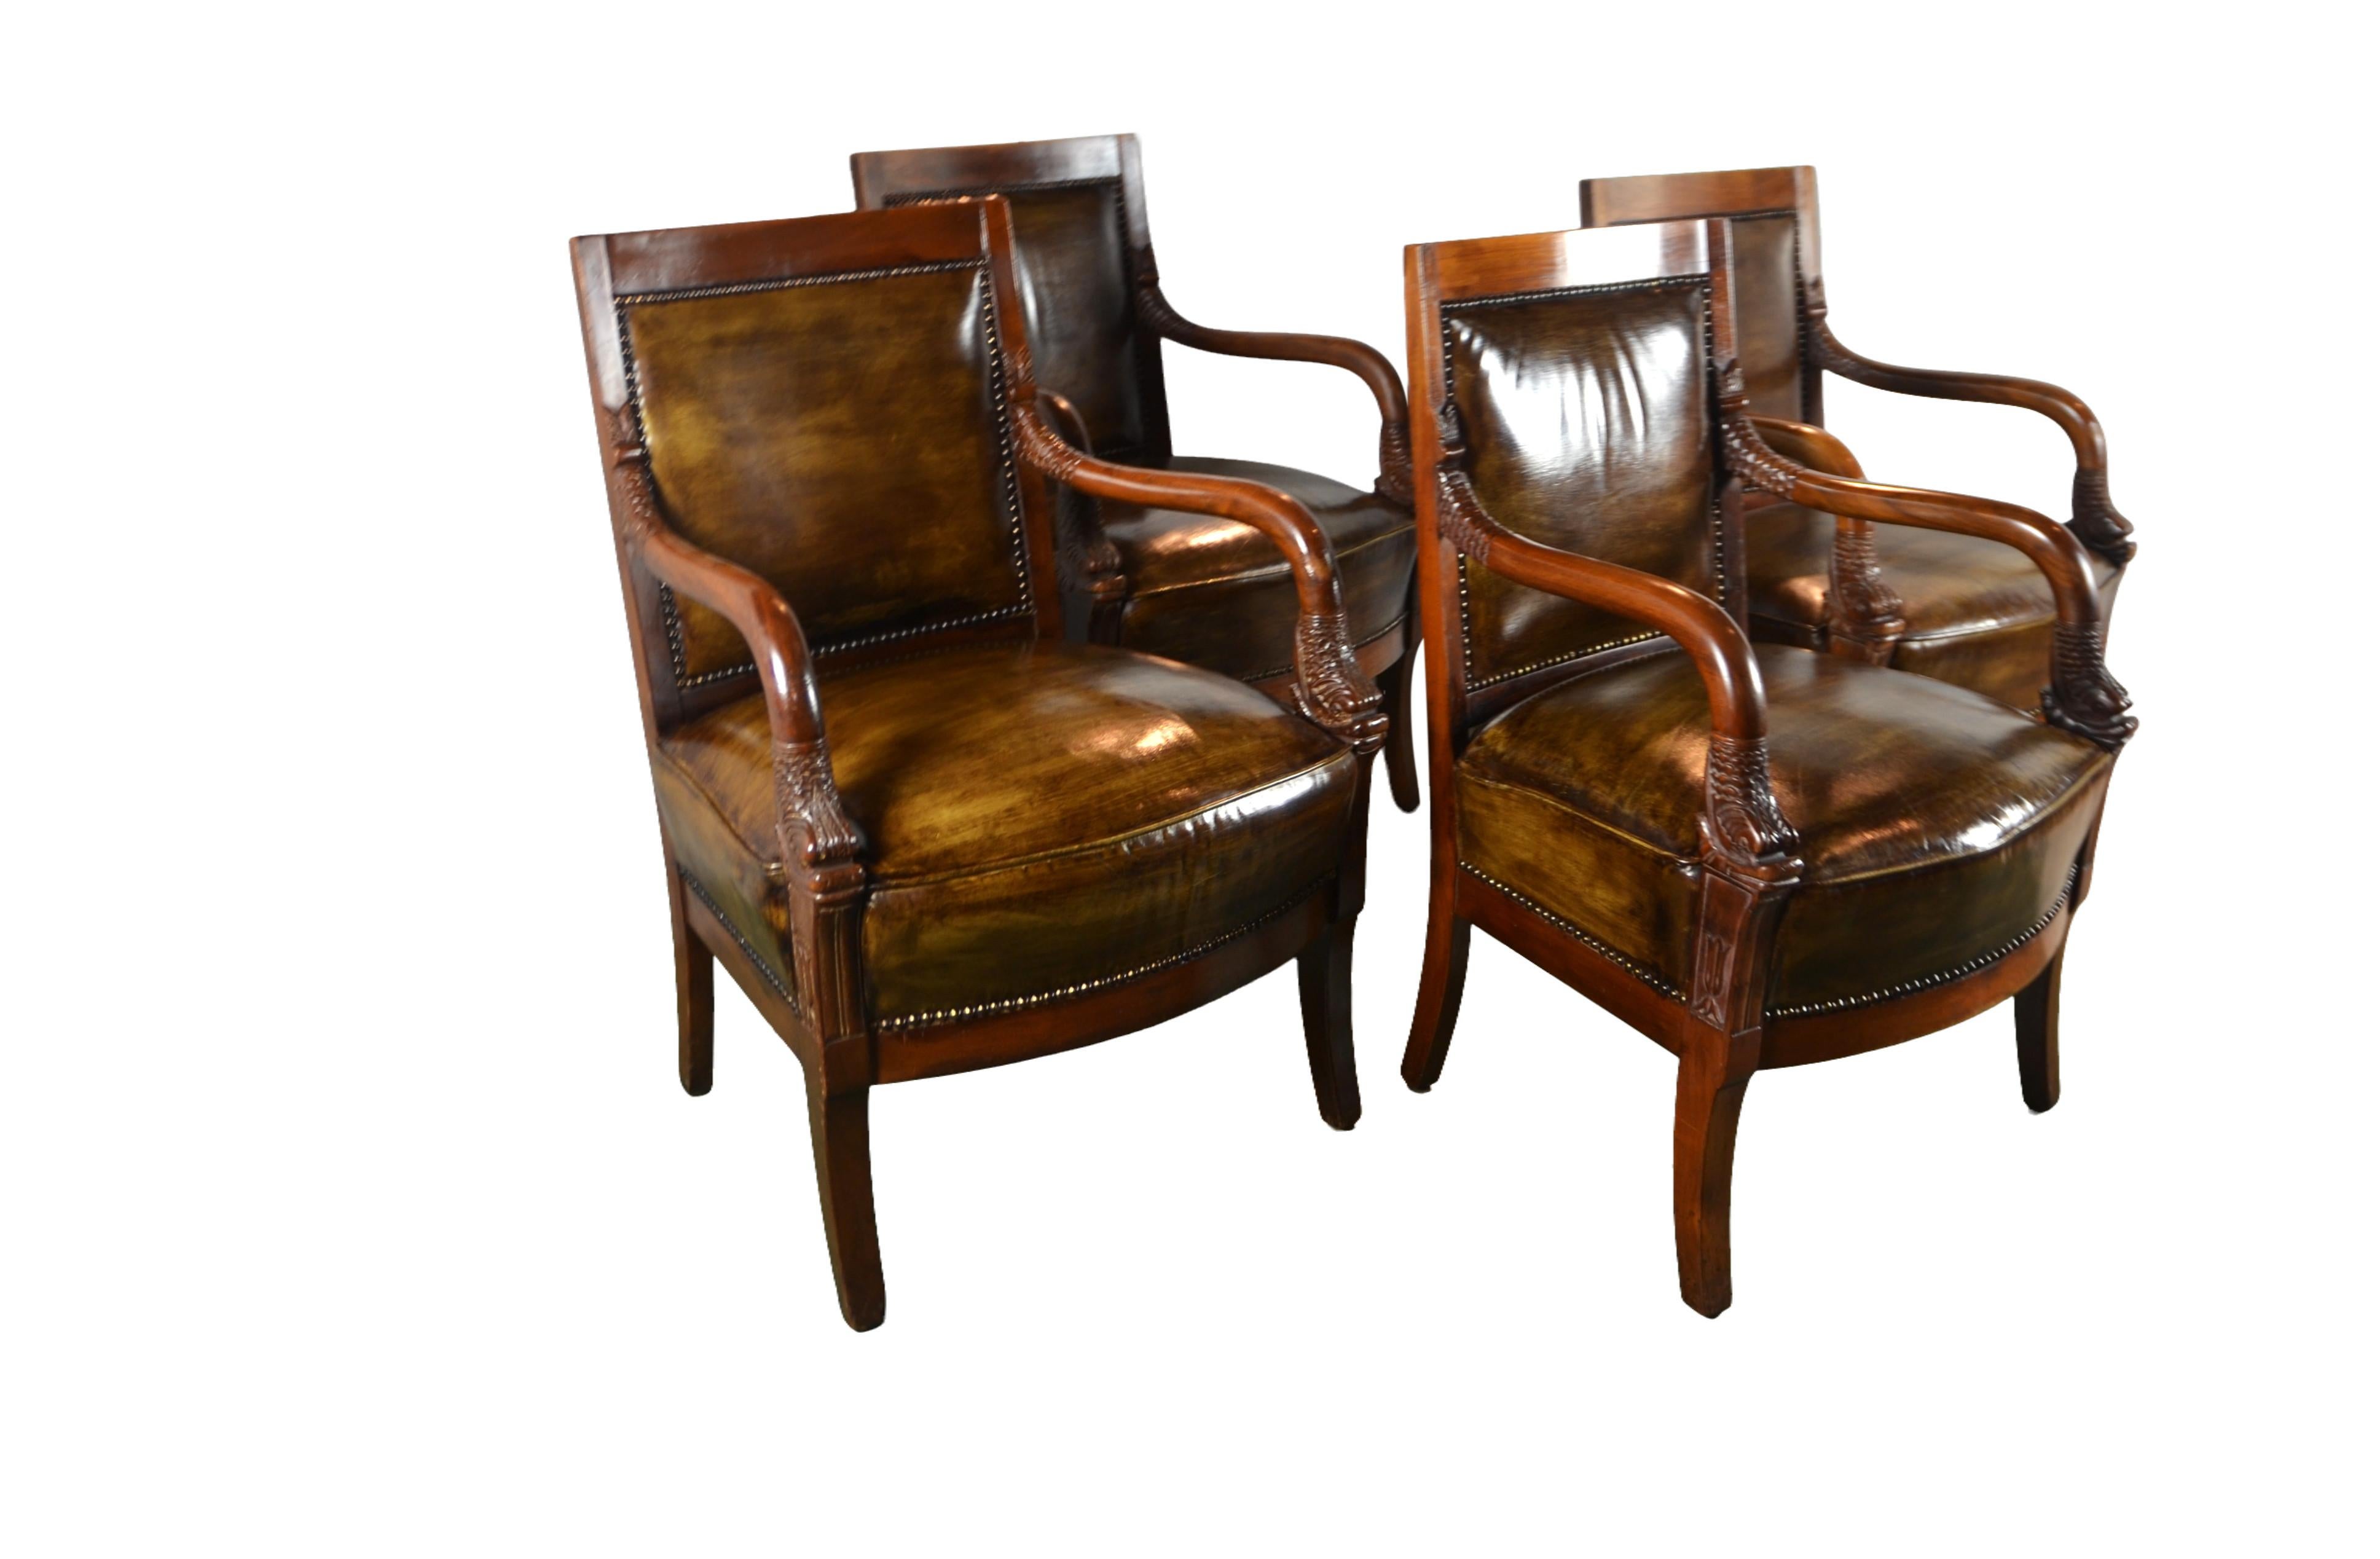 Set of 4 Empire-style armchairs. The end of each arm dolphin's face is carved. The chairs are covered in leather with nailheads. Dimension of the arm 26.50